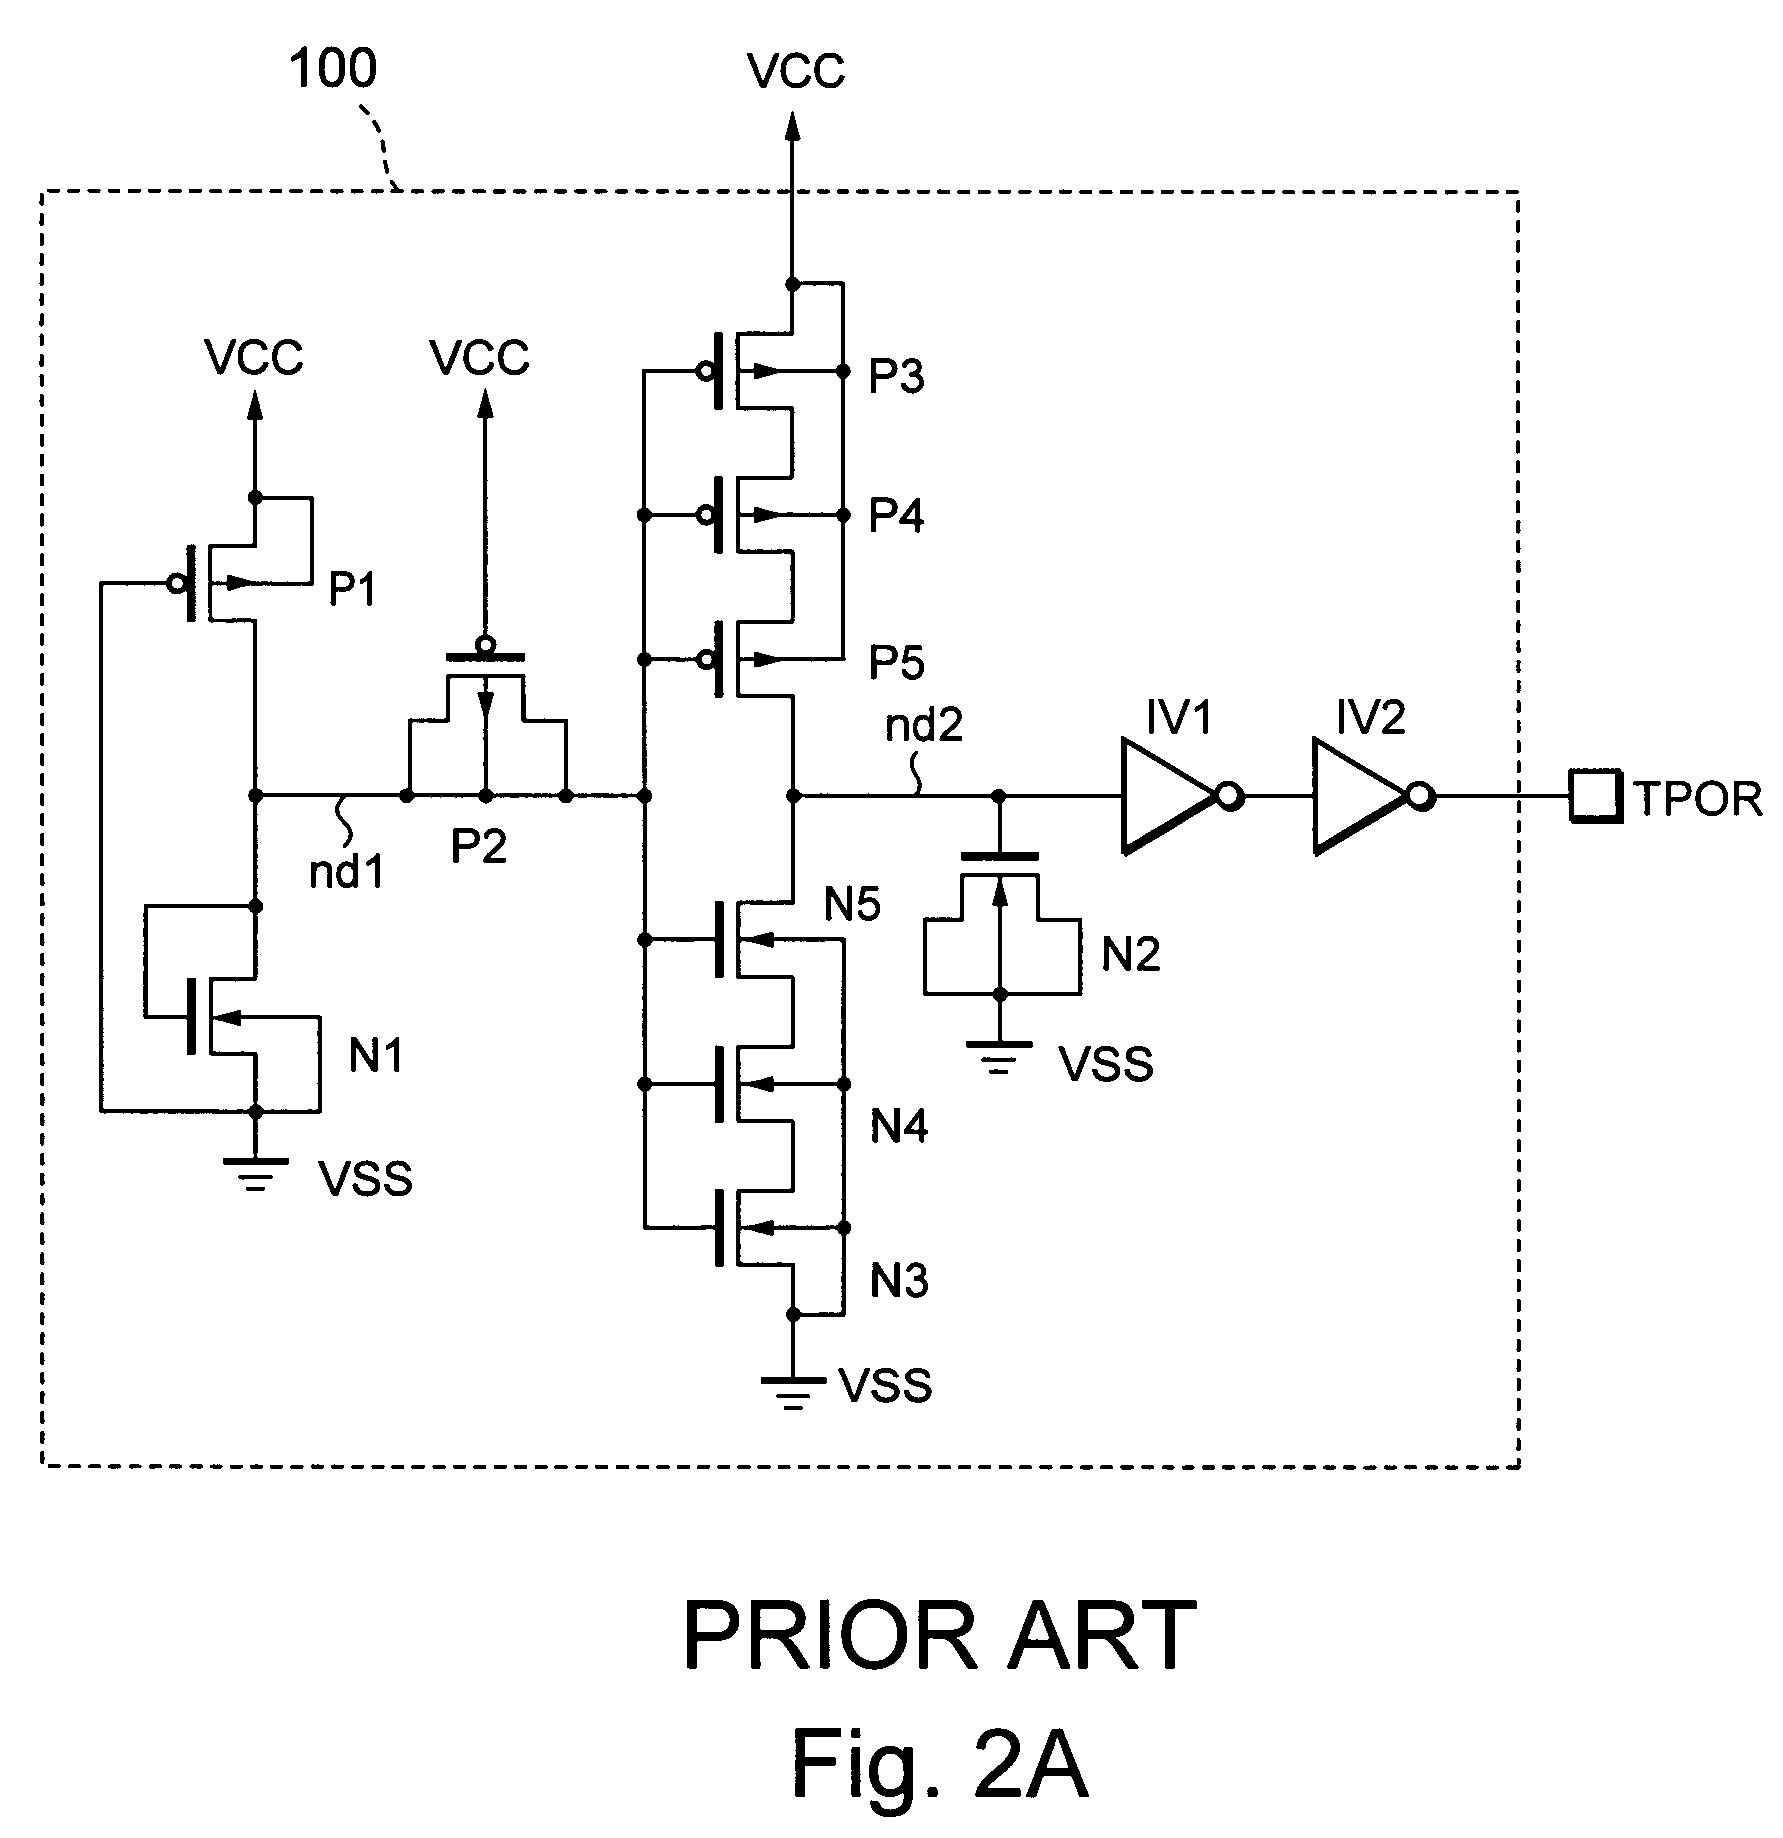 Semiconductor integrated circuit having a power-on reset circuit in a semiconductor memory device